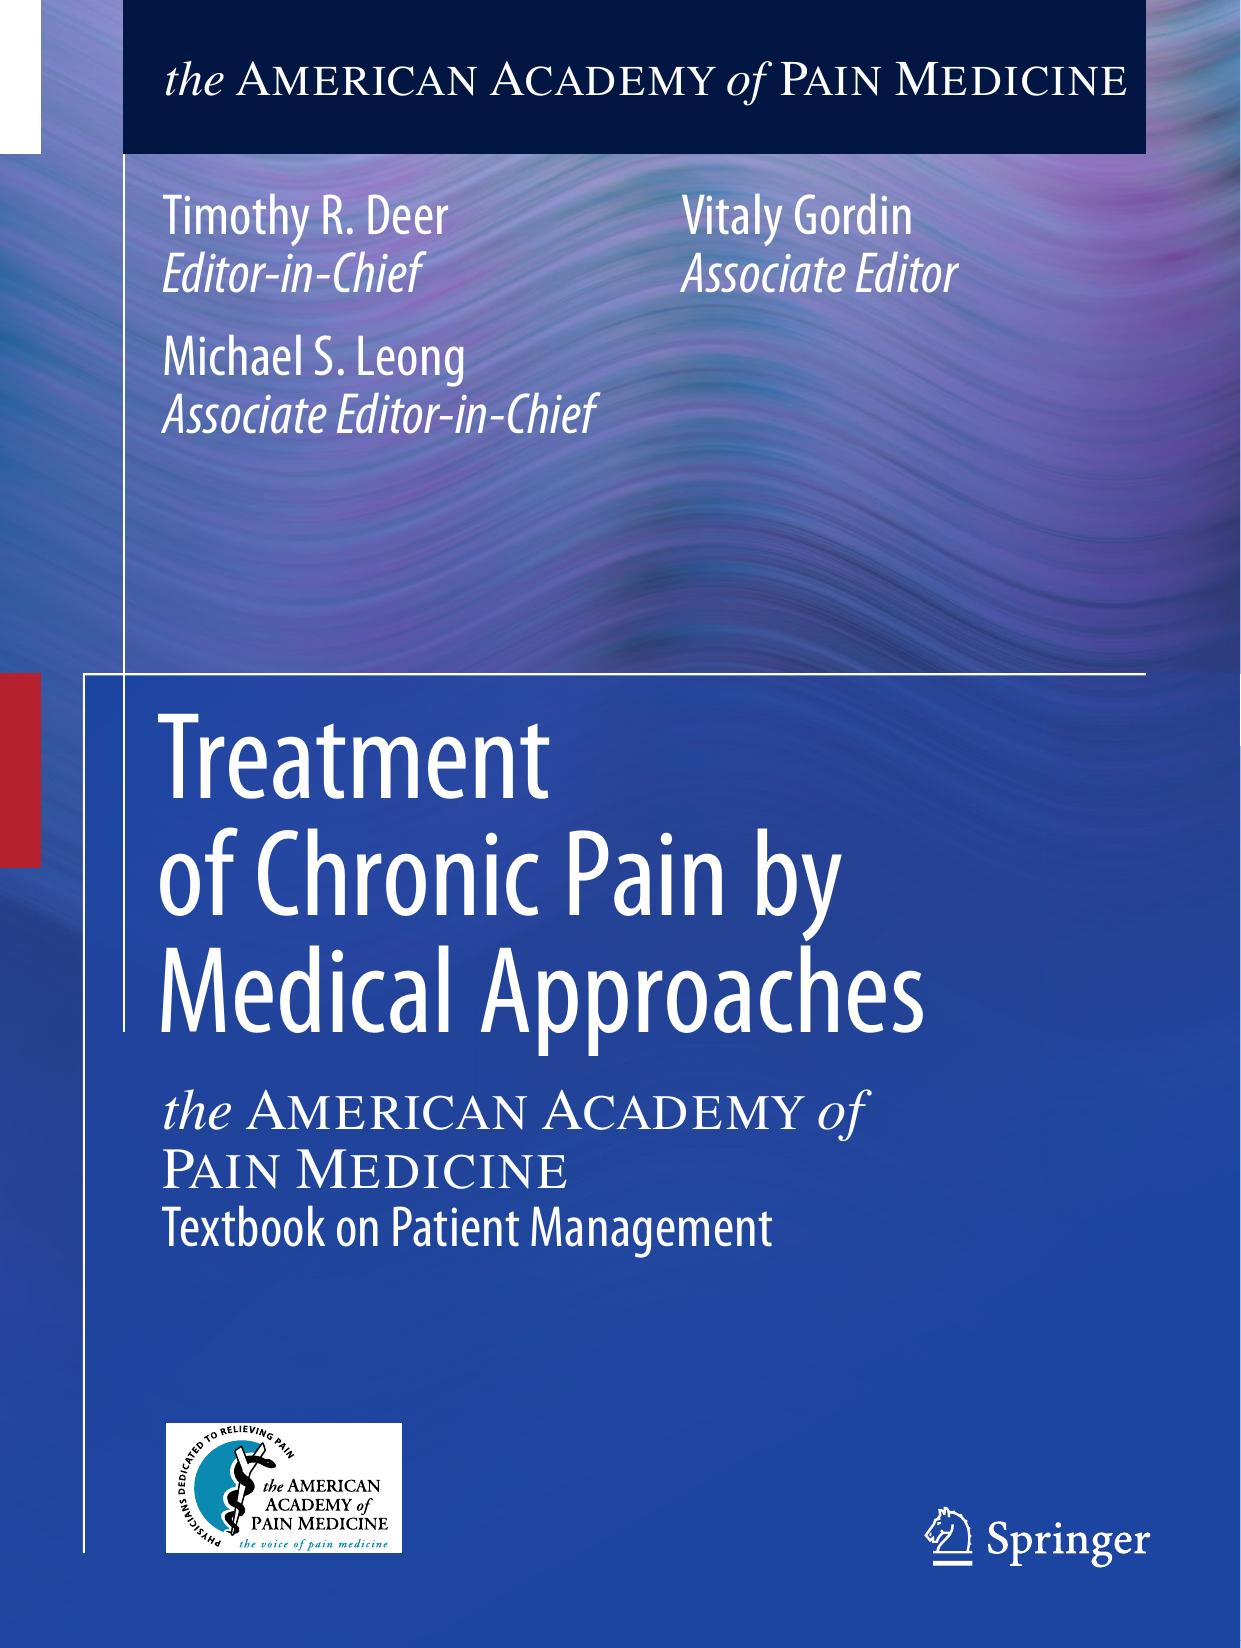 Treatment of Chronic Pain by Medical Approaches  the AMERICAN ACADEMY of PAIN MEDICINE Textbook on Patient Management 2015